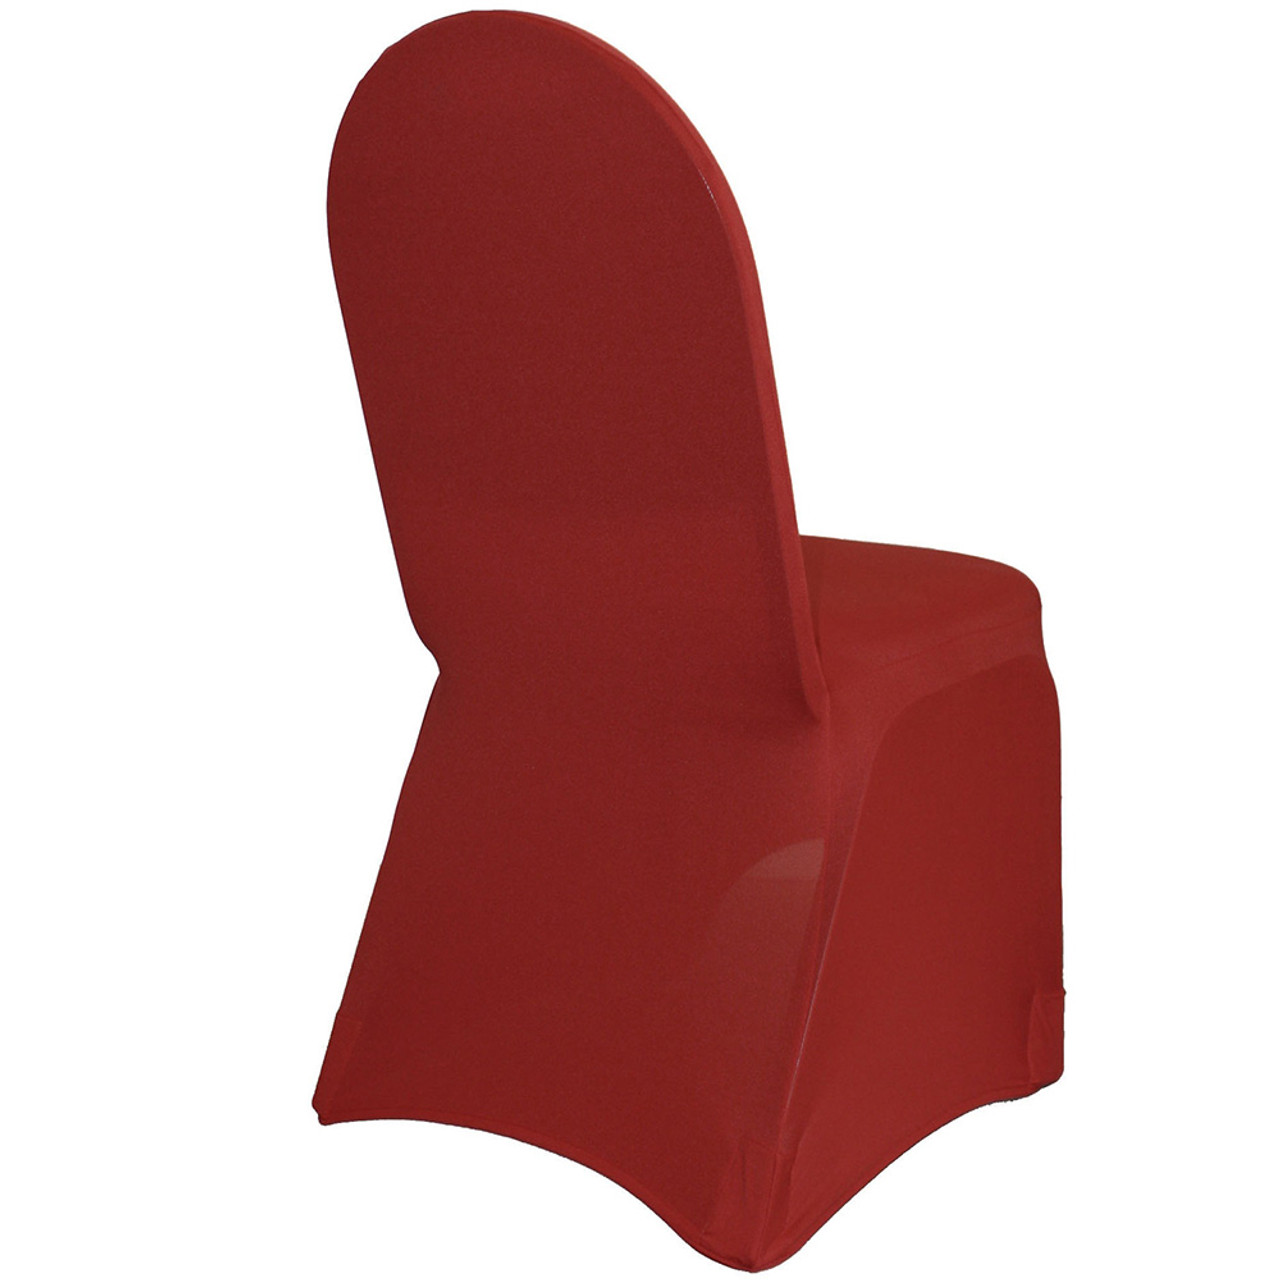 Your Chair Covers - Spandex Folding Chair Cover Red for Wedding, Party, Birthday, Patio, etc. - image 4 of 5